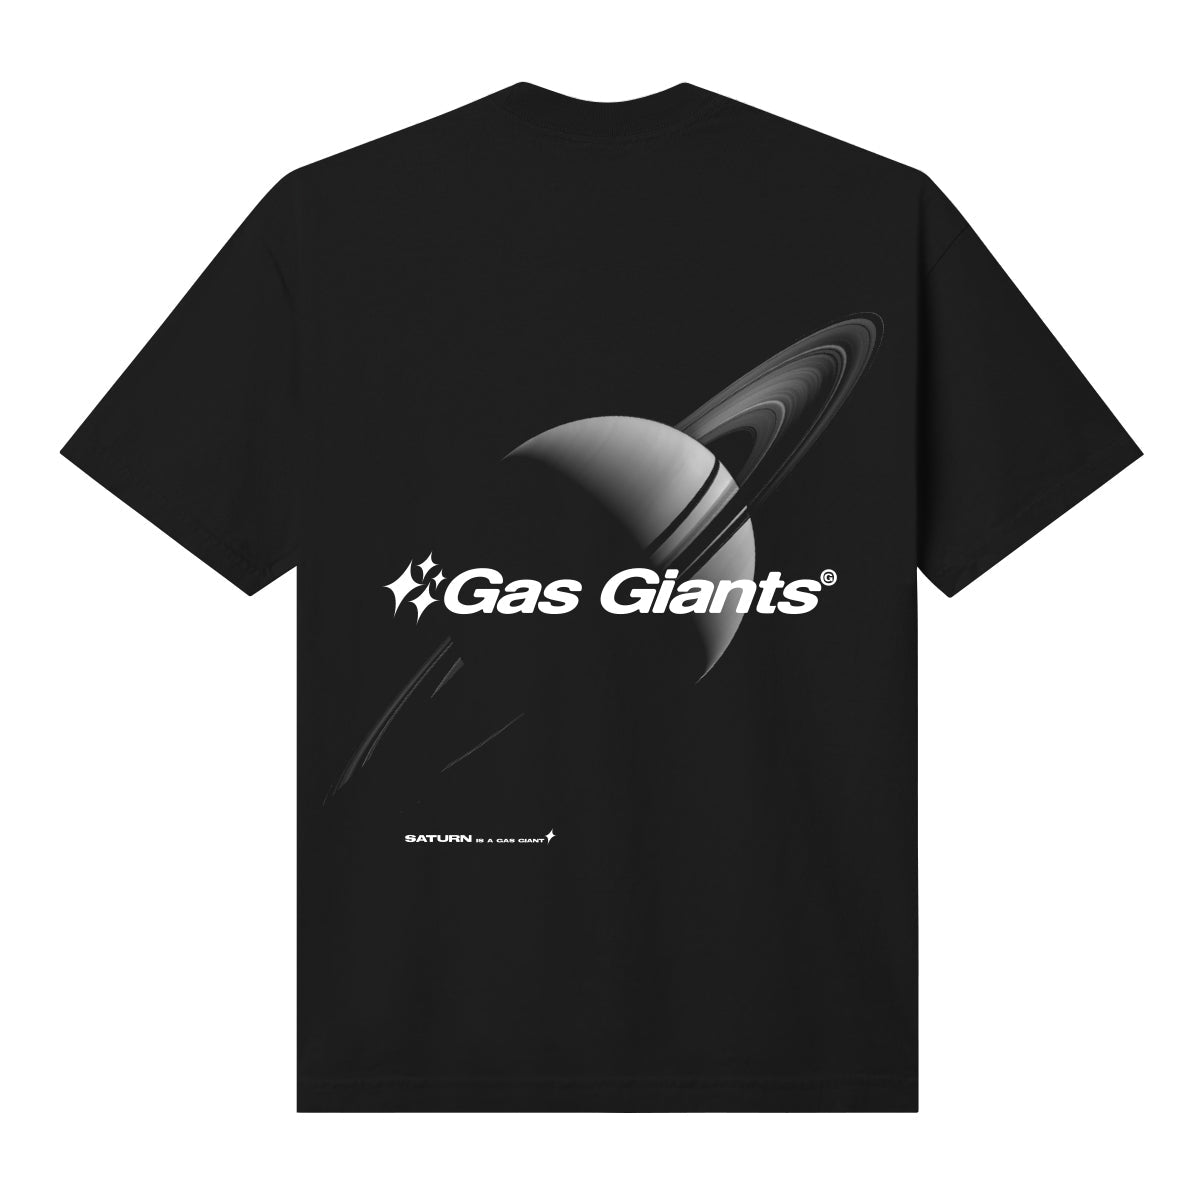 SATURN IS A GAS GIANT T-SHIRT